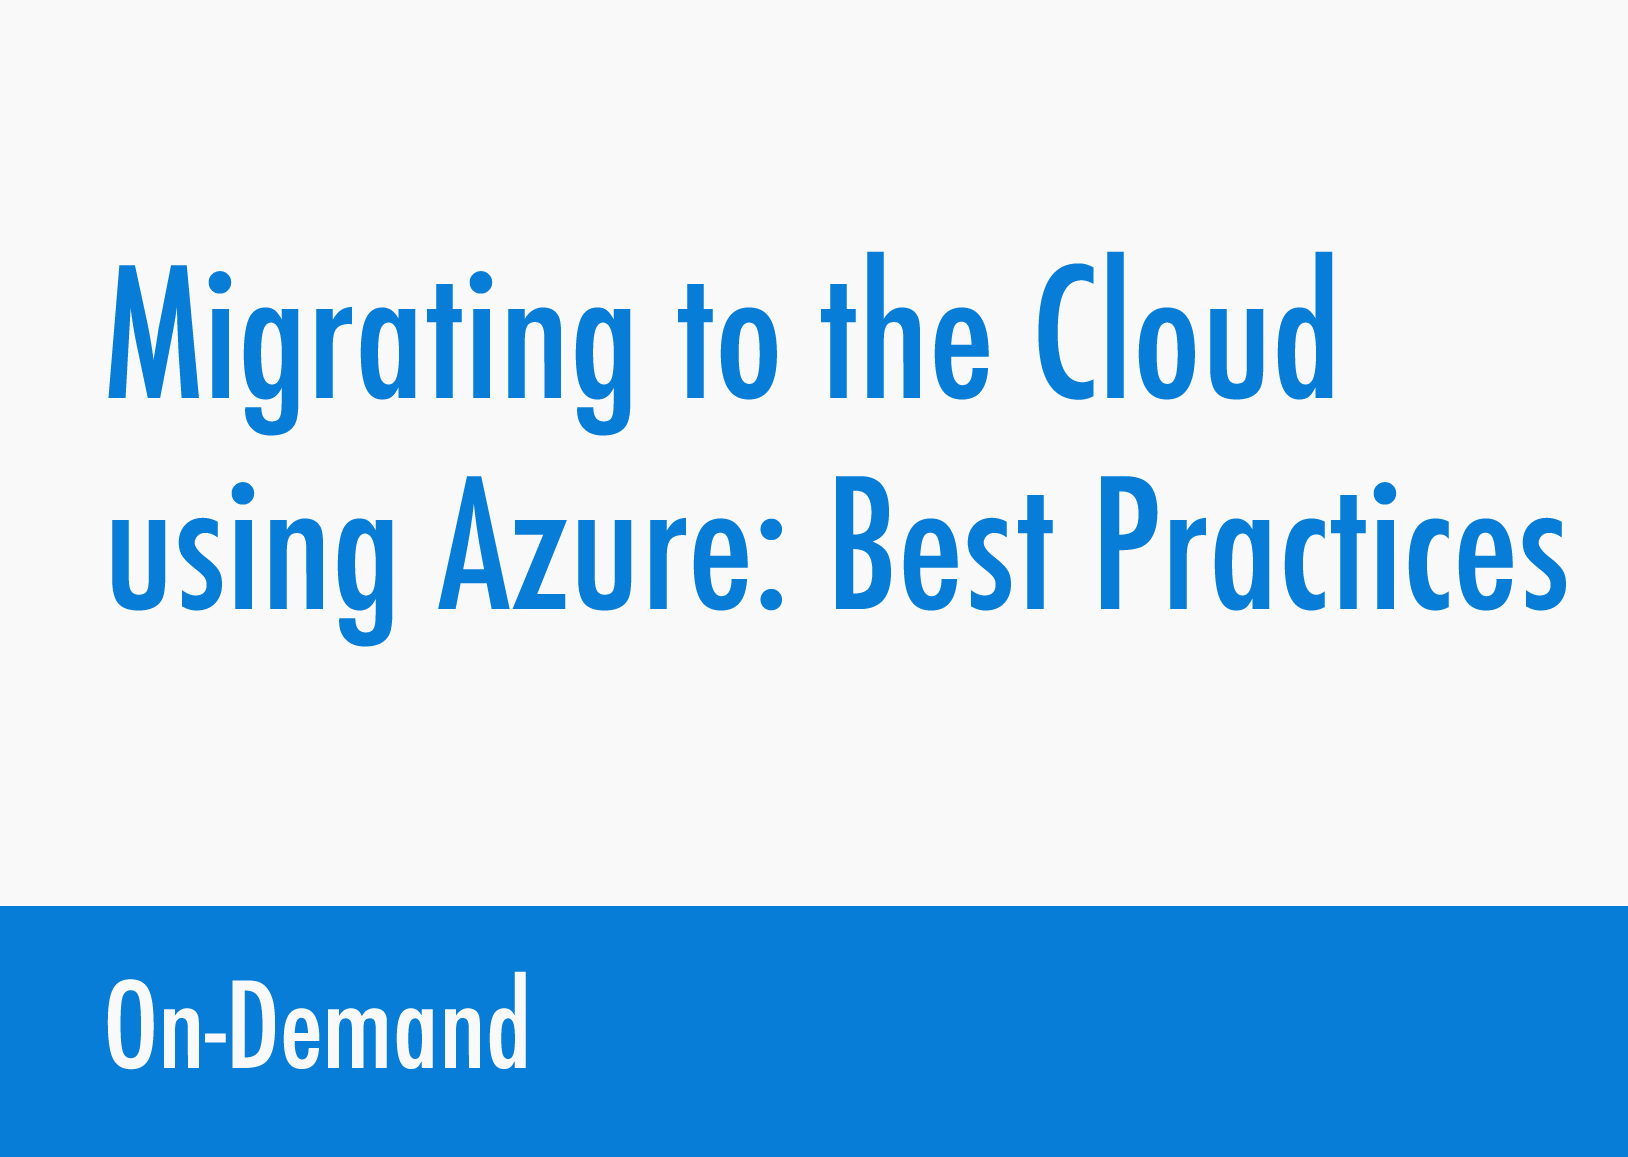 Migrating to the Cloud using Azure best practices